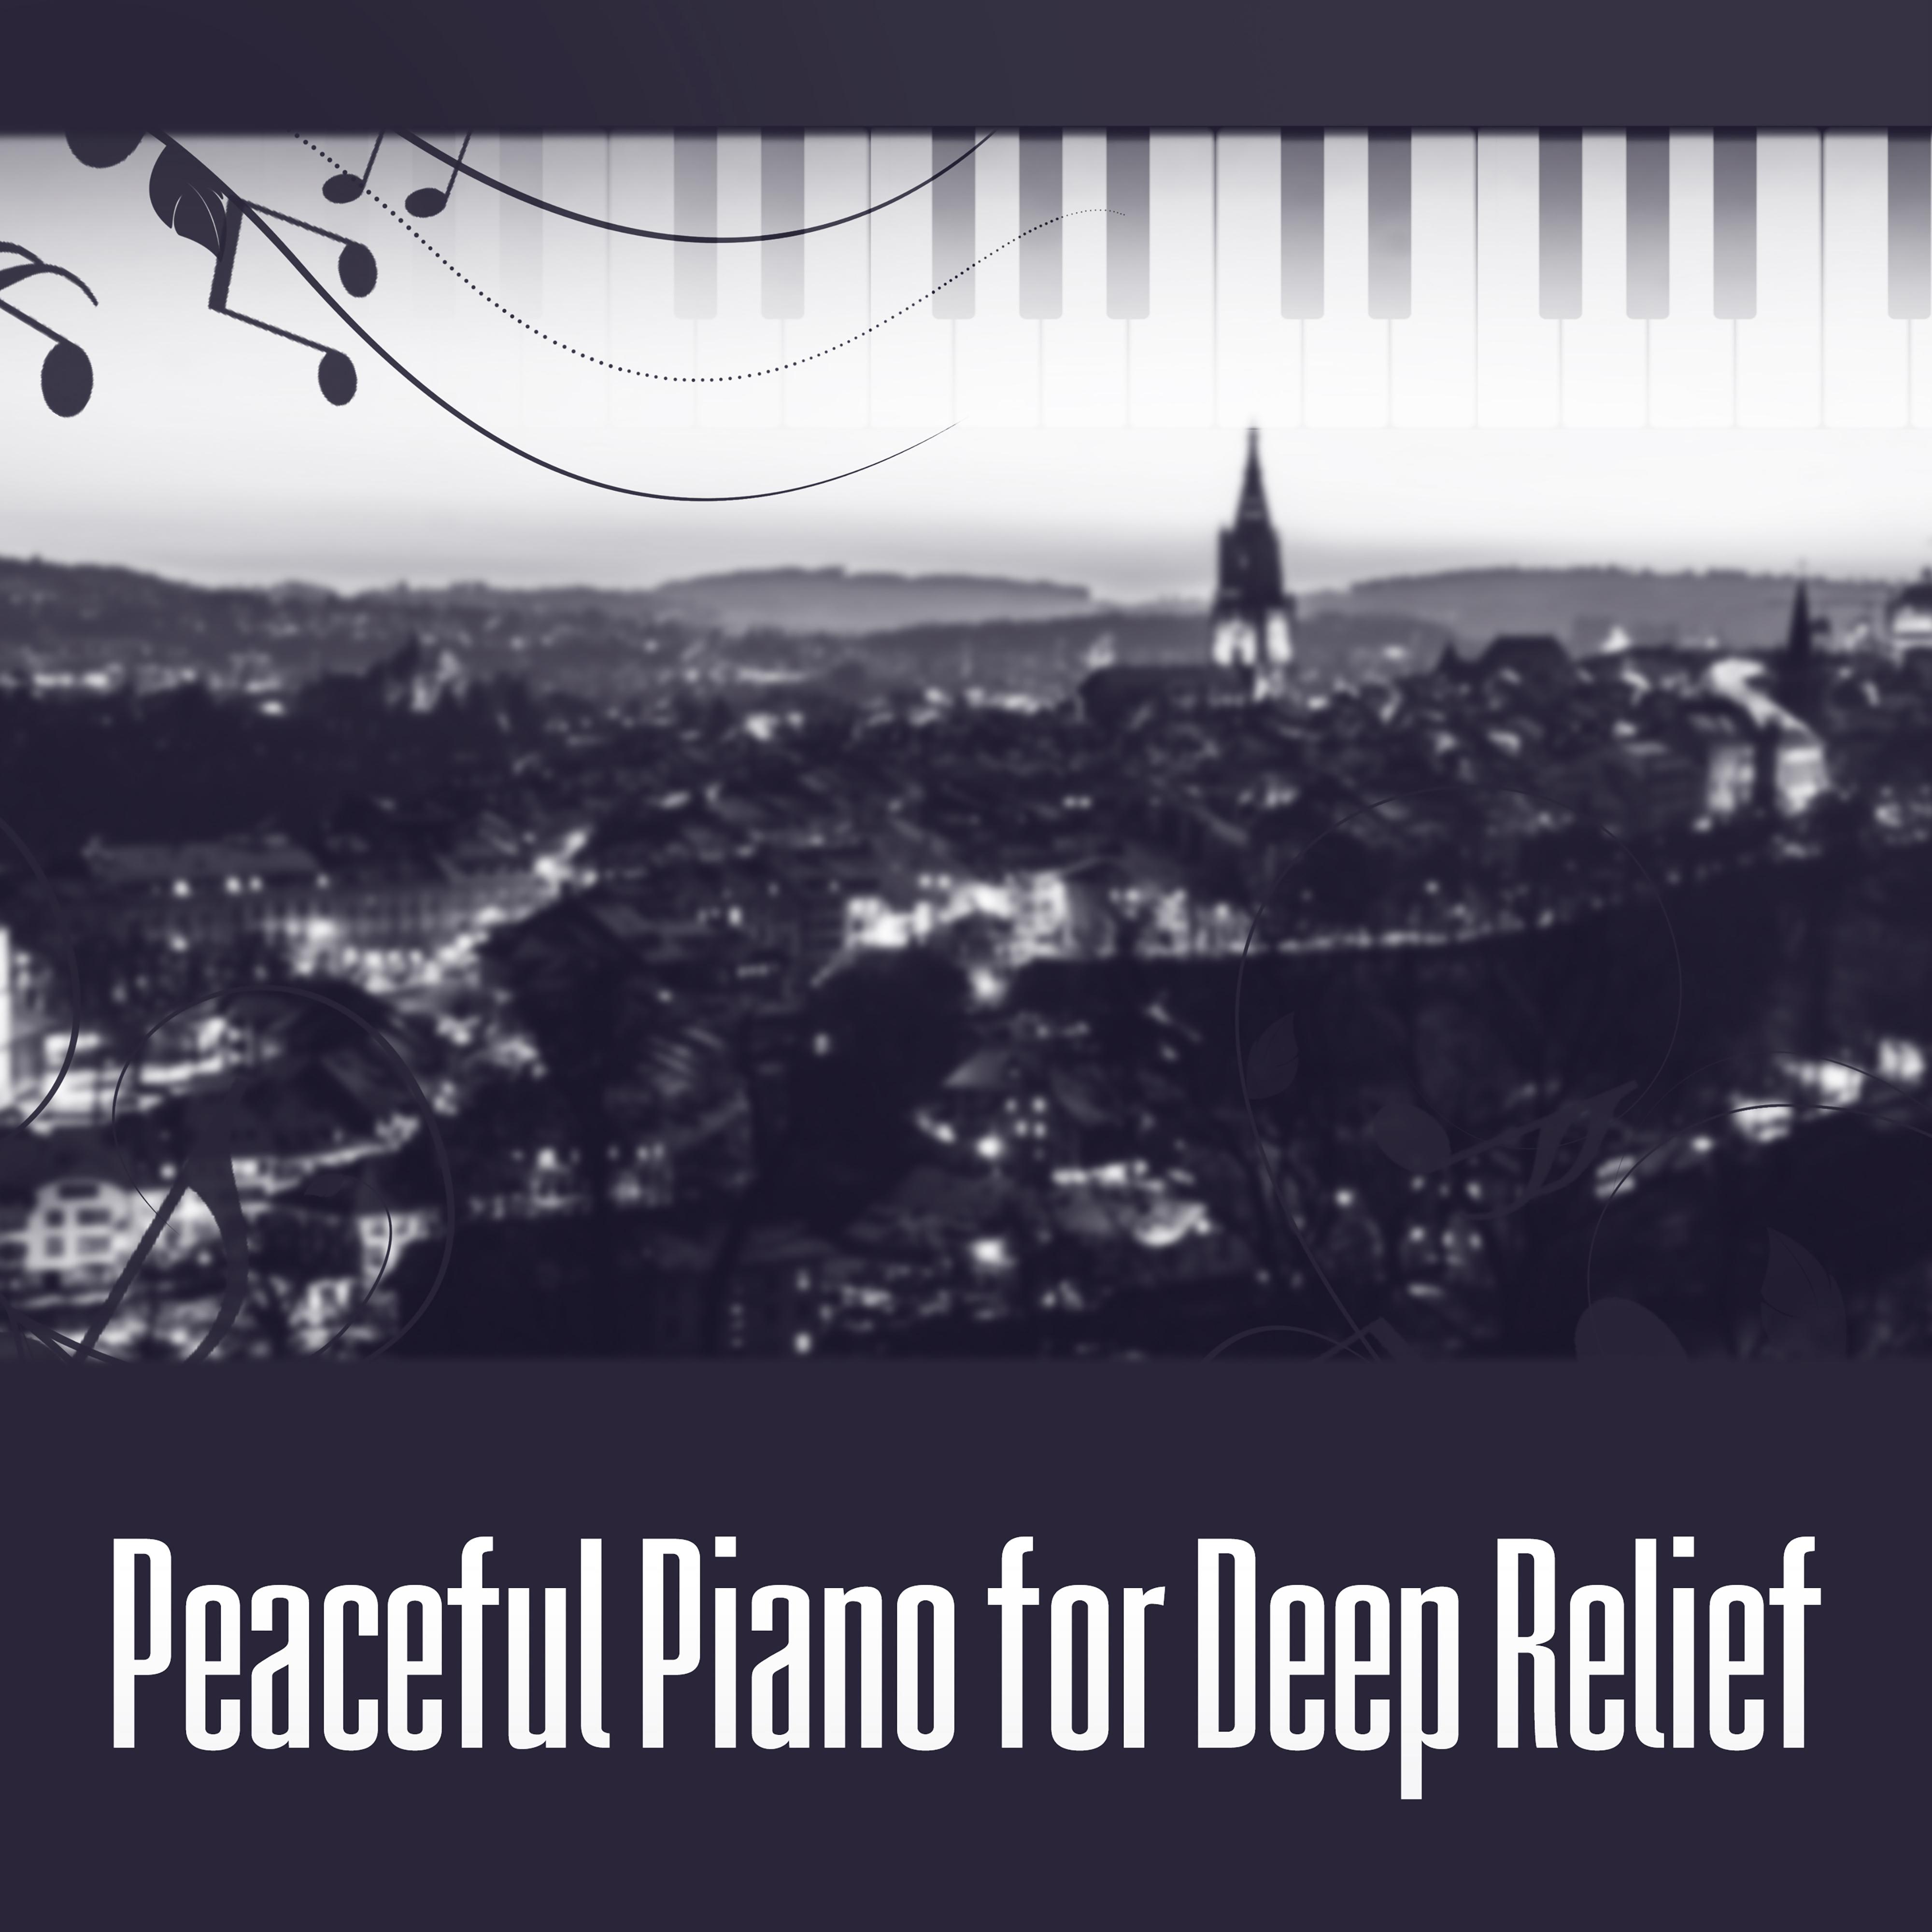 Peaceful Piano for Deep Relief – Relaxation Jazz Music, Instrumental Sounds to Rest, Mellow Jazz, Pure Mind